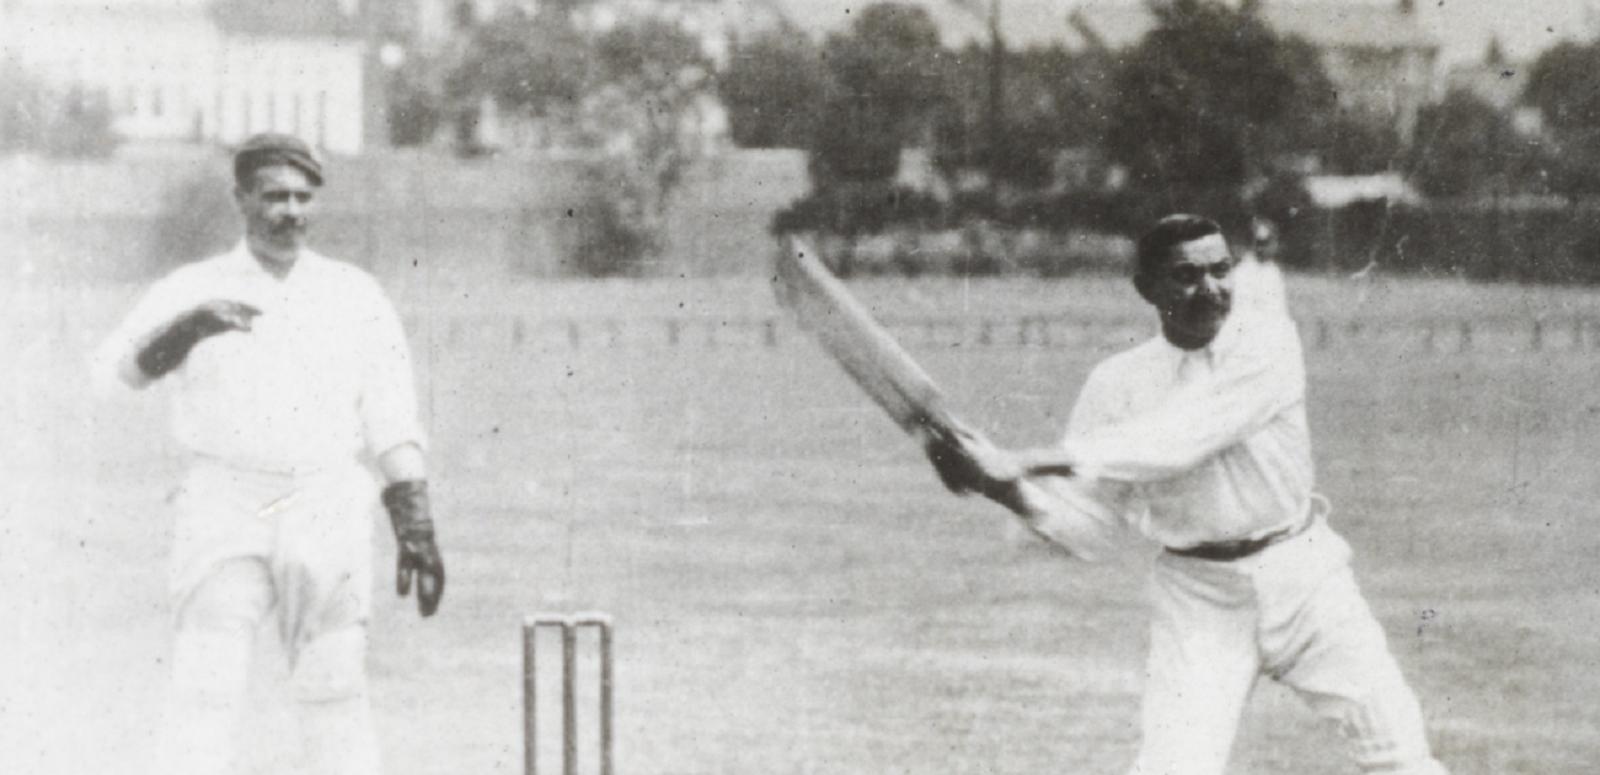 Black and white still of cricketers Ranji and C.B. Fry